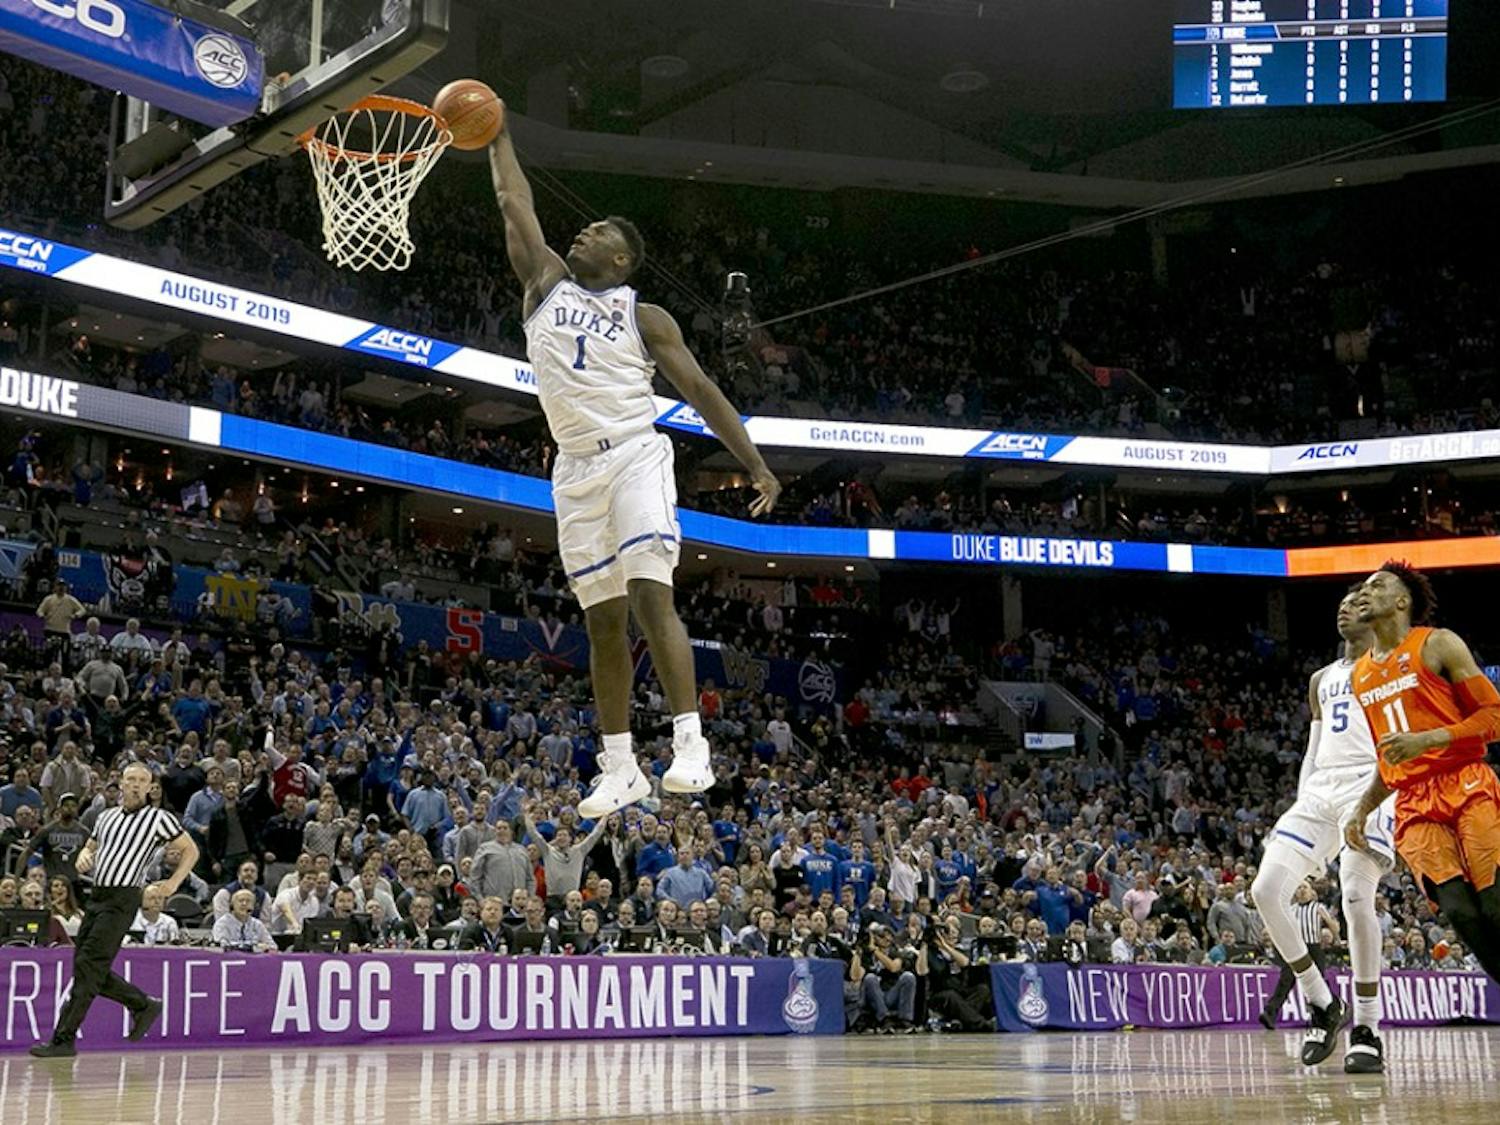 Duke&apos;s Zion Williamson (1) glides to the basket for a dunk in the opening minutes of play against Syracuse in the quarterfinals of the ACC Tournament at the Specturm Center in Charlotte, N.C., on Thursday, March 14, 2019. (Robert Willett/Raleigh News &amp; Observer/TNS)